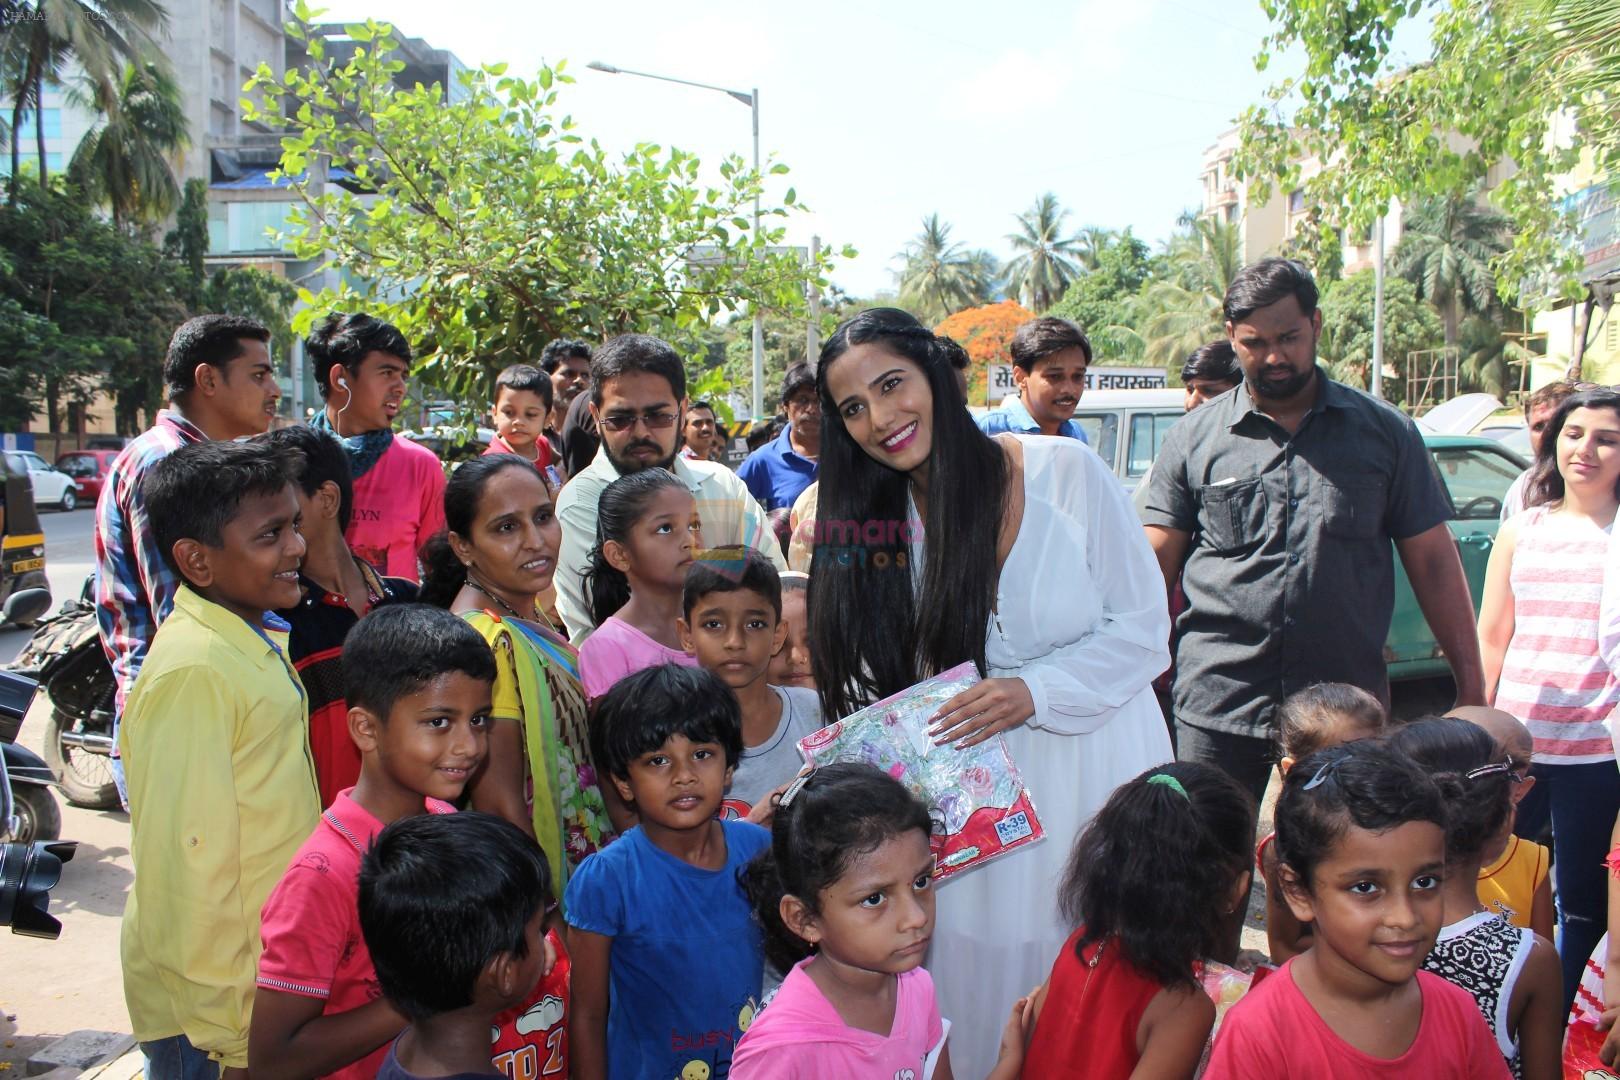 Poonam Pandey Distribute Raincoat To Neddy Kids on 30th May 2017